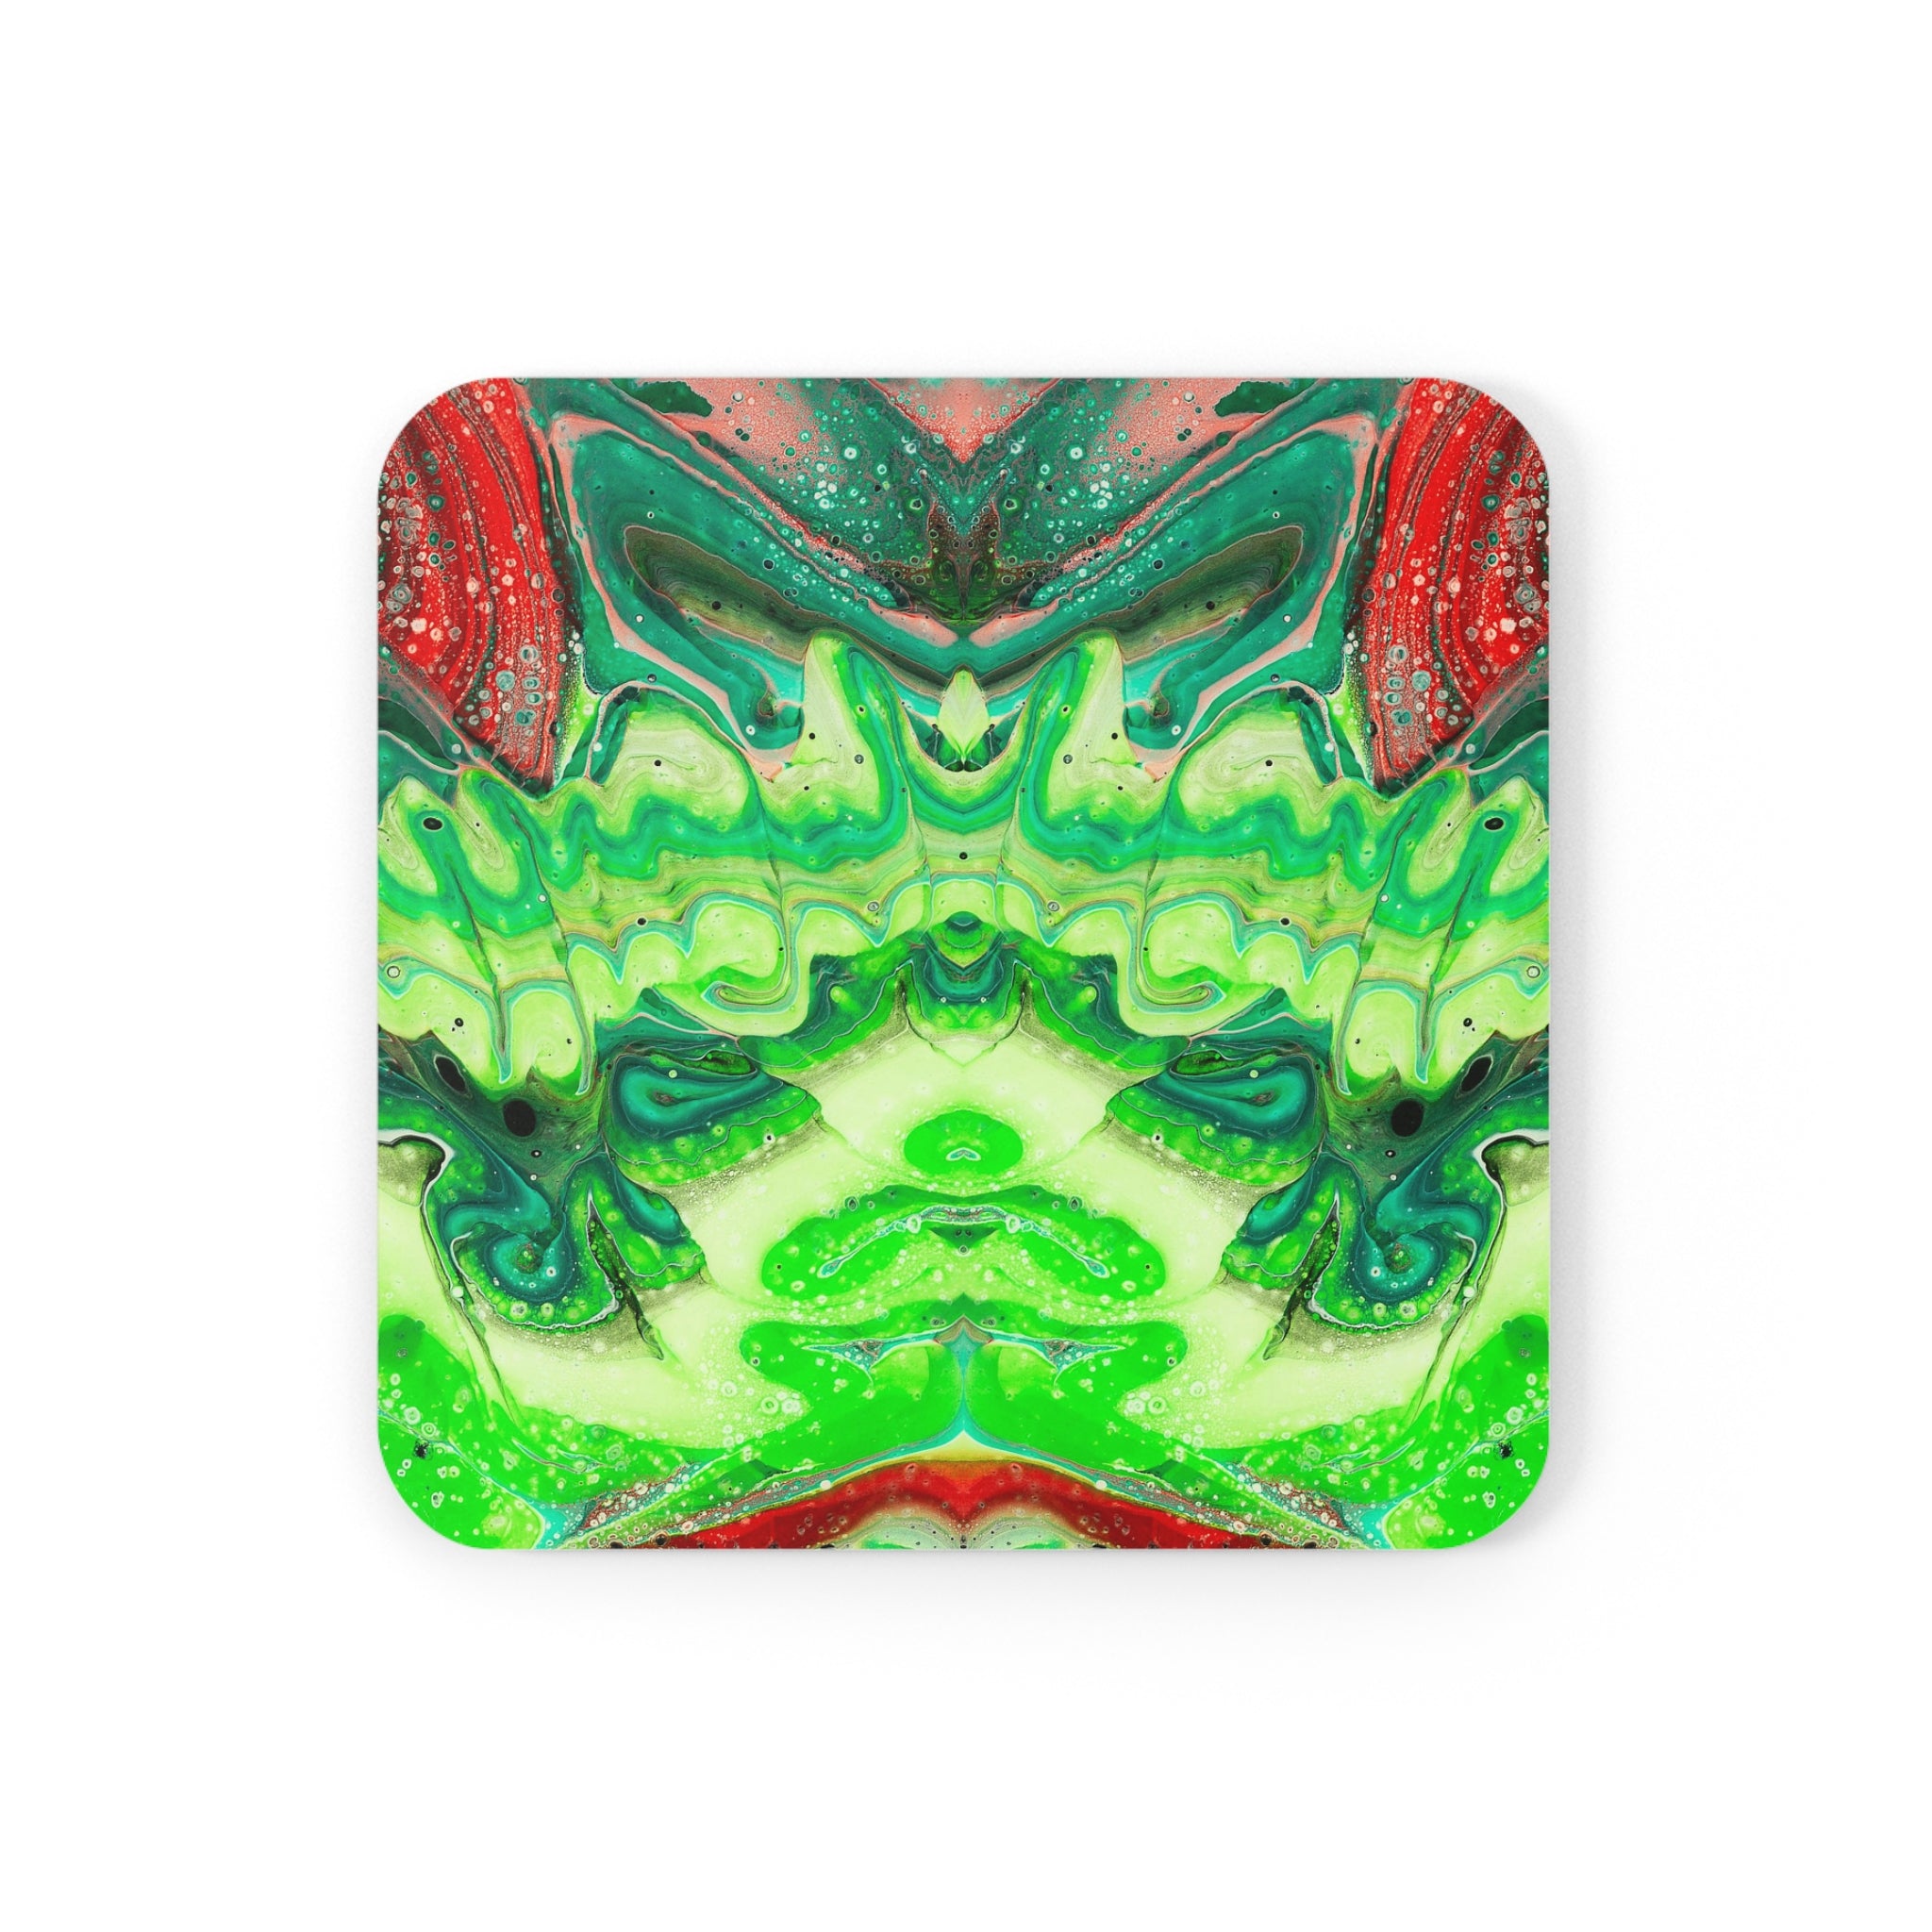 Cameron Creations - Seas Of Green - Stylish Coffee Coaster - Square Front